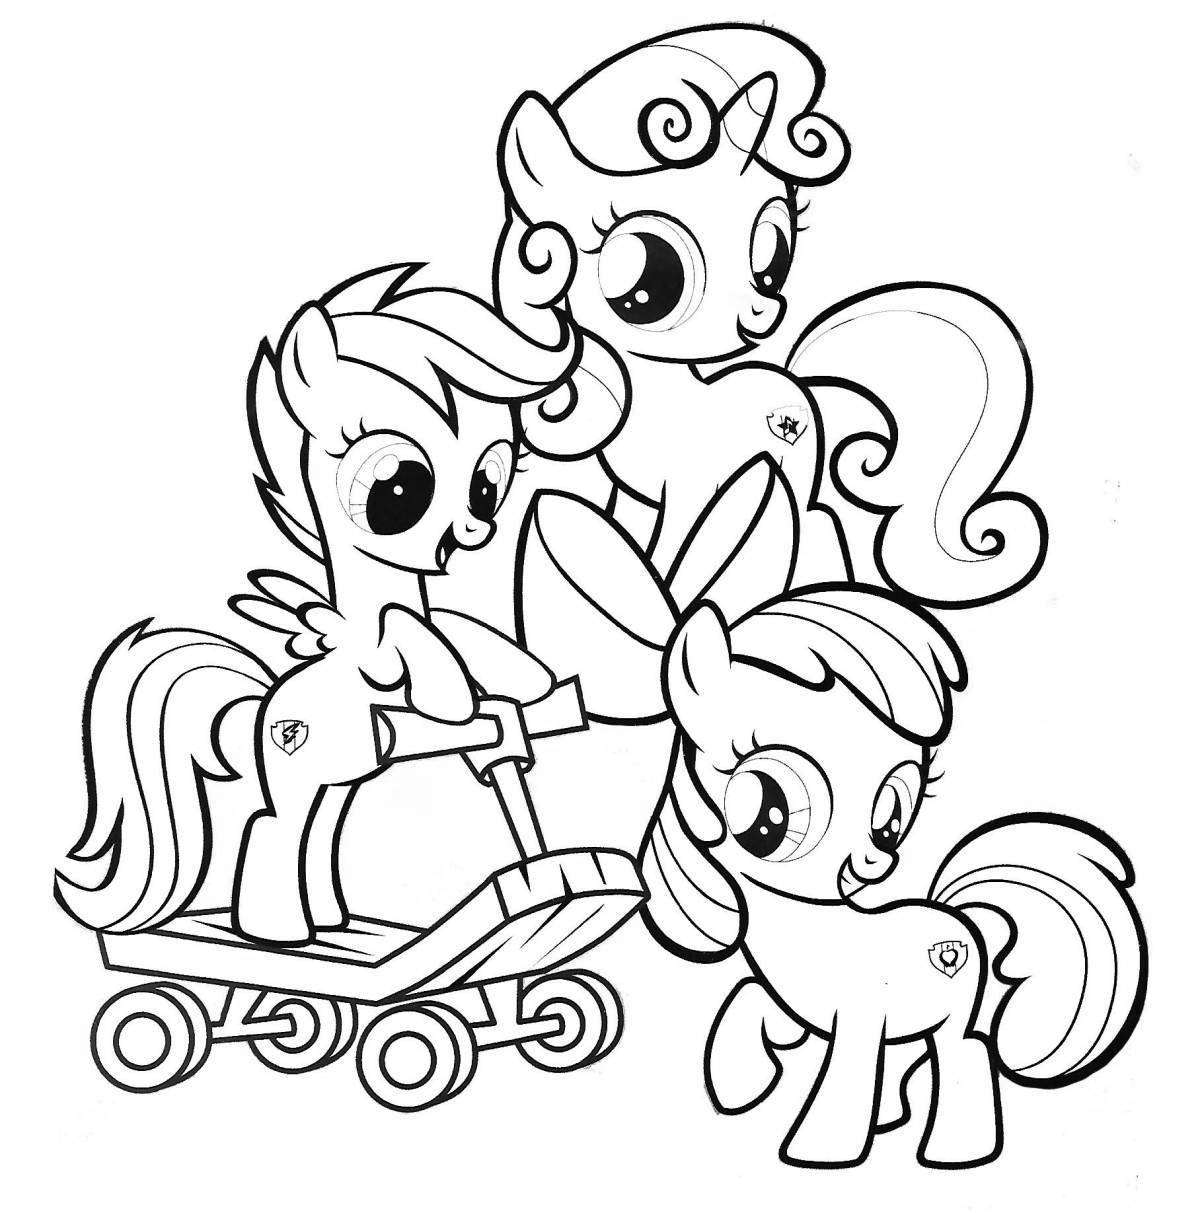 Awesome pony coloring game for girls